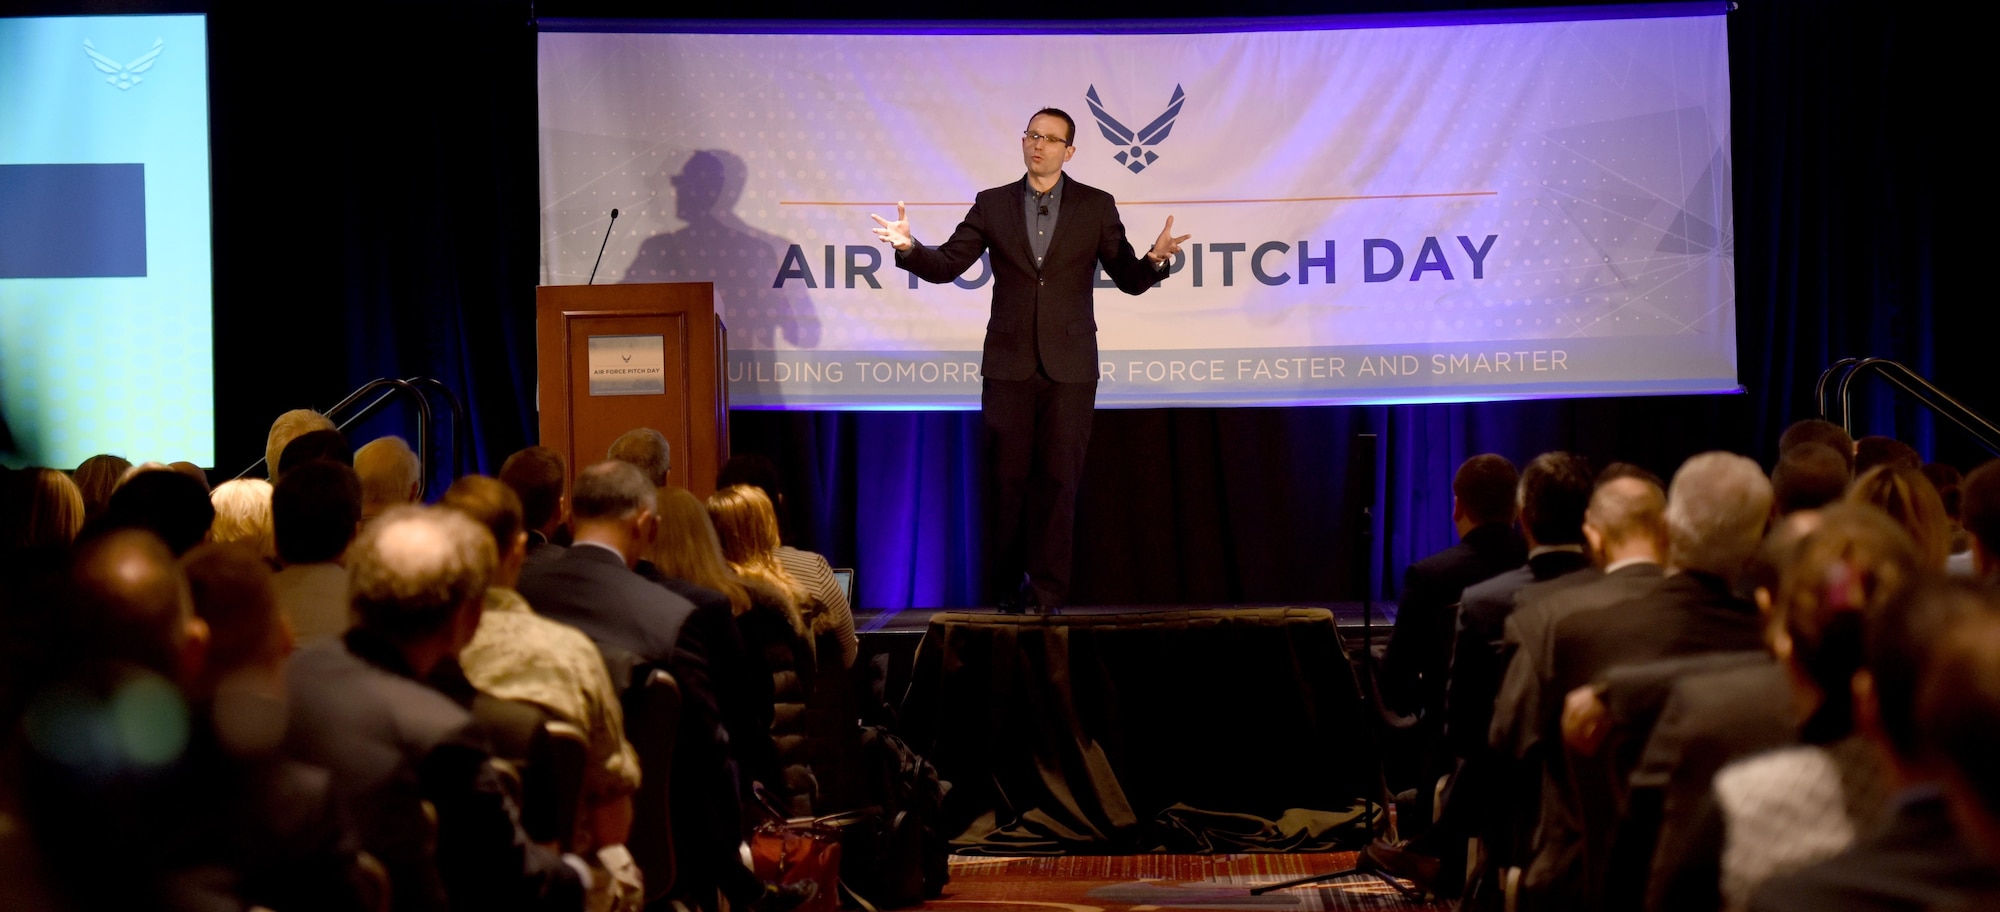 Dr. Will Roper, assistant secretary of the Air Force for acquisition, technology and logistics, speaks to a crowd of small businesses, venture capitalists and Airmen during the inaugural Air Force Pitch Day in New York, March 7, 2019. Air Force Pitch Day is designed as a fast-track program to put companies on one-page contracts and same-day awards with the swipe of a government credit card. The Air Force is partnering with small businesses to help further national security in air, space and cyberspace. (U.S. Air Force photo by Tech Sgt. Anthony Nelson Jr.)